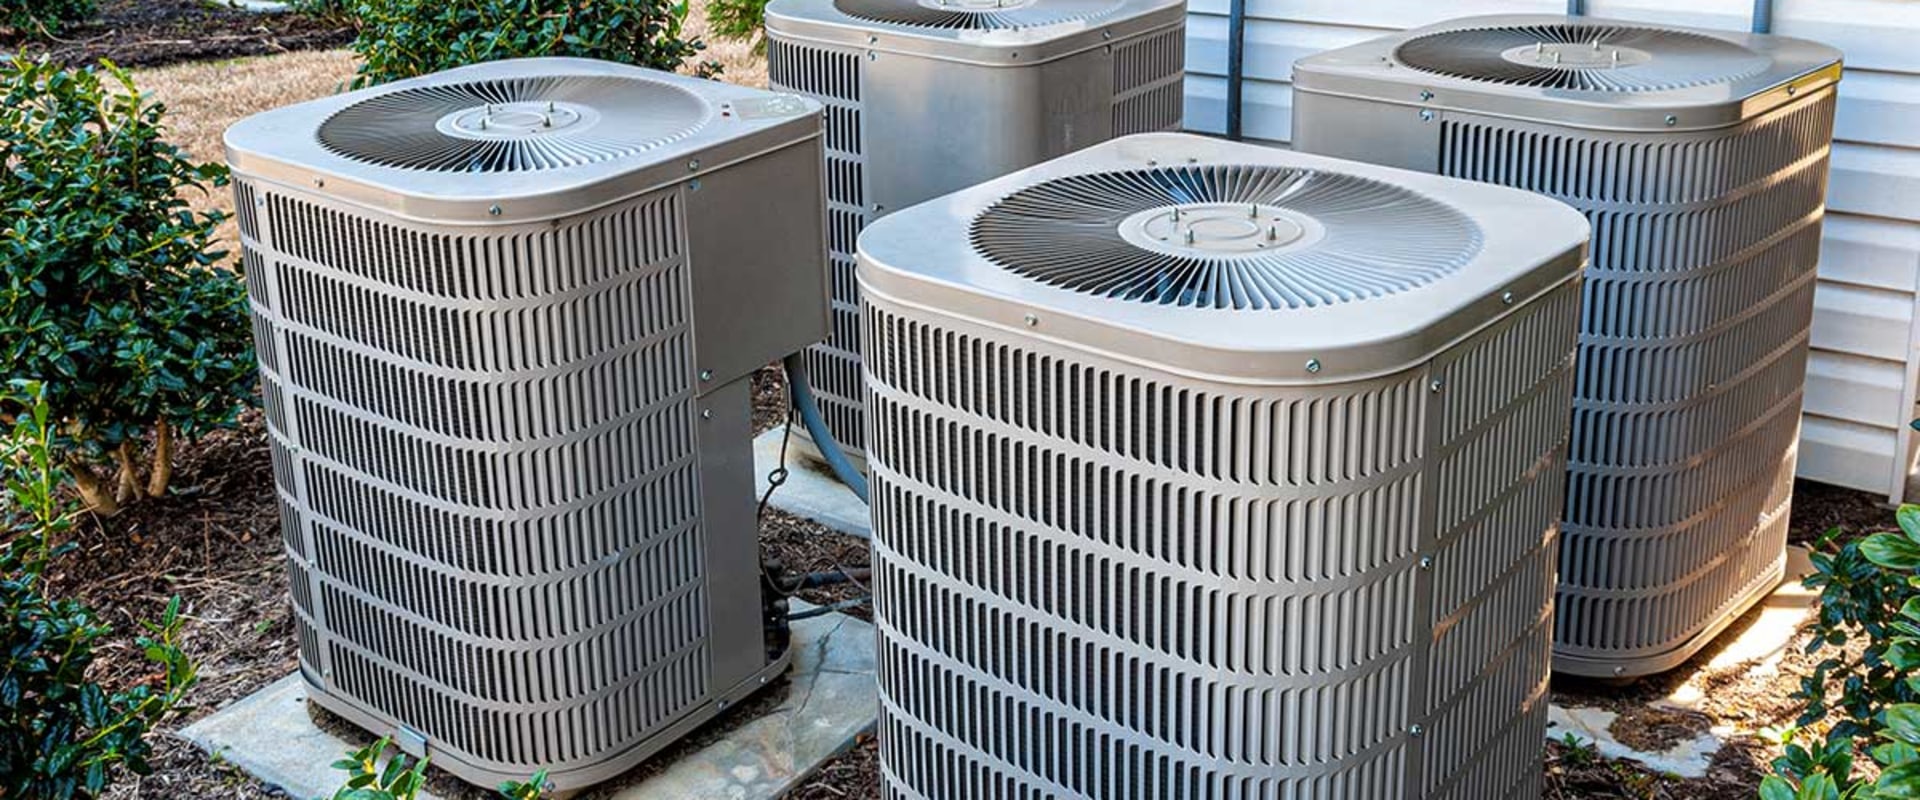 Maintaining Your HVAC System in Palm Beach County, FL: Professional Services for Optimal Comfort and Efficiency